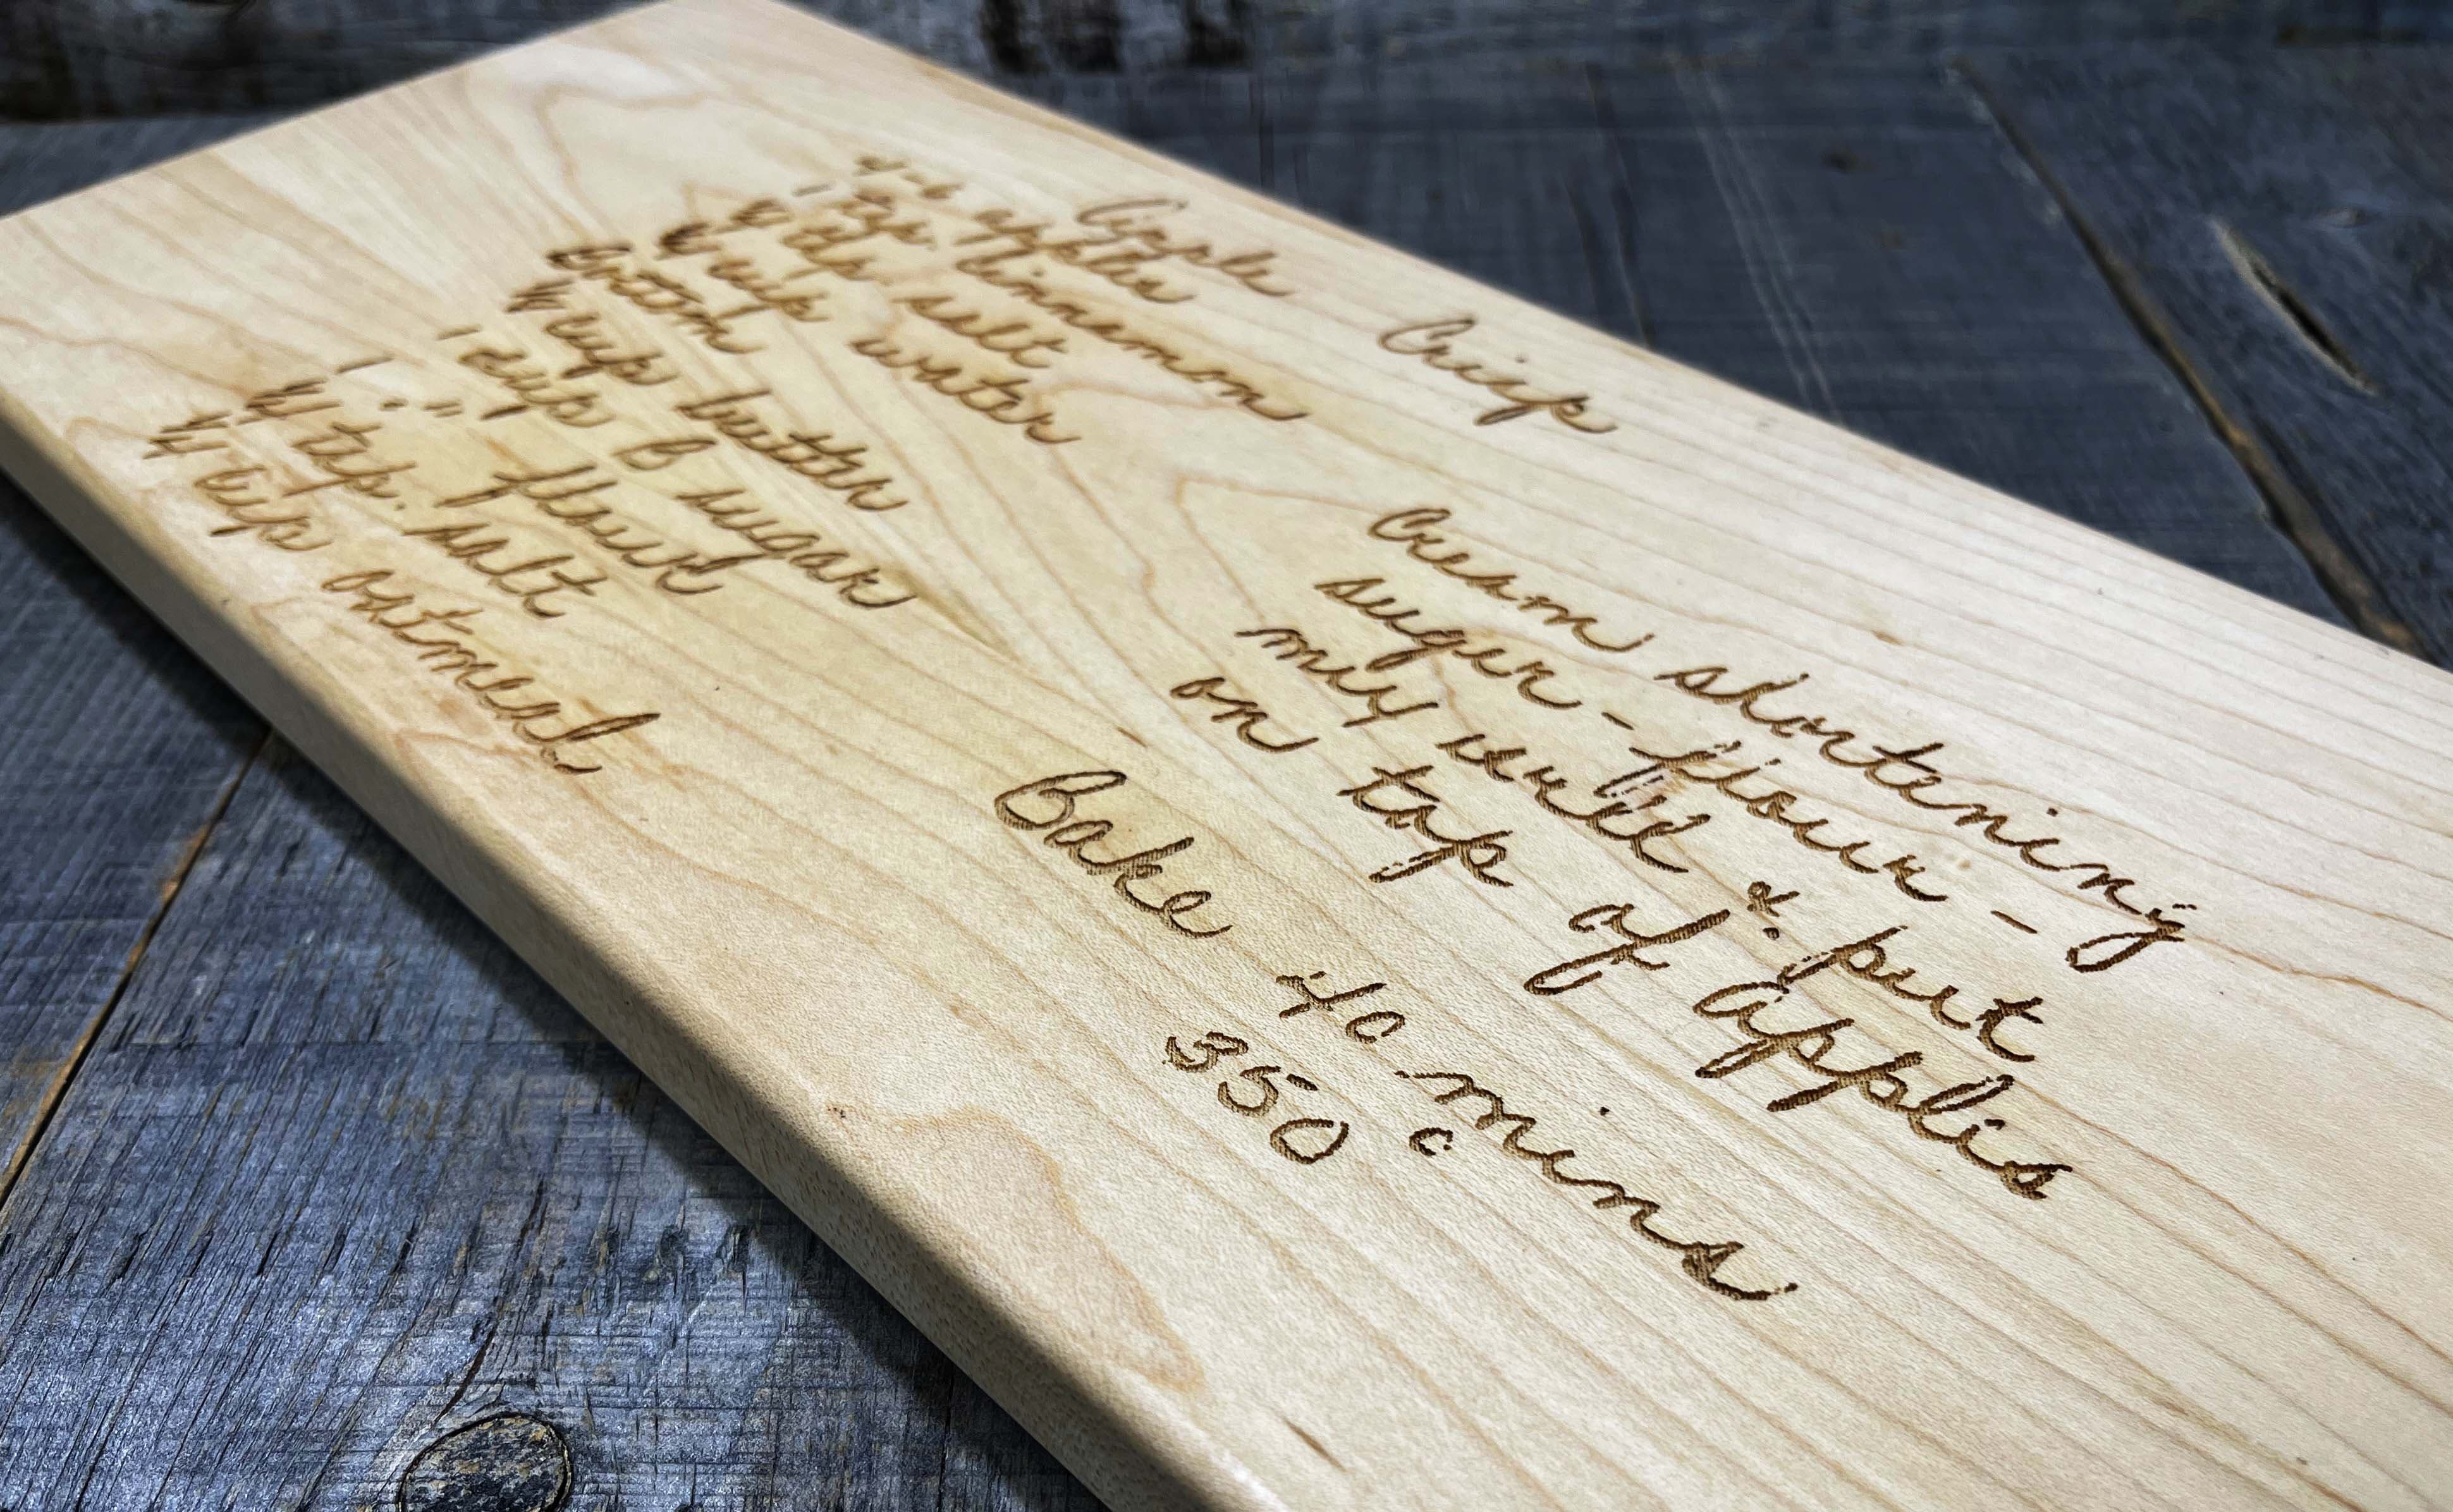 Family Recipe Engraved Serving Board.